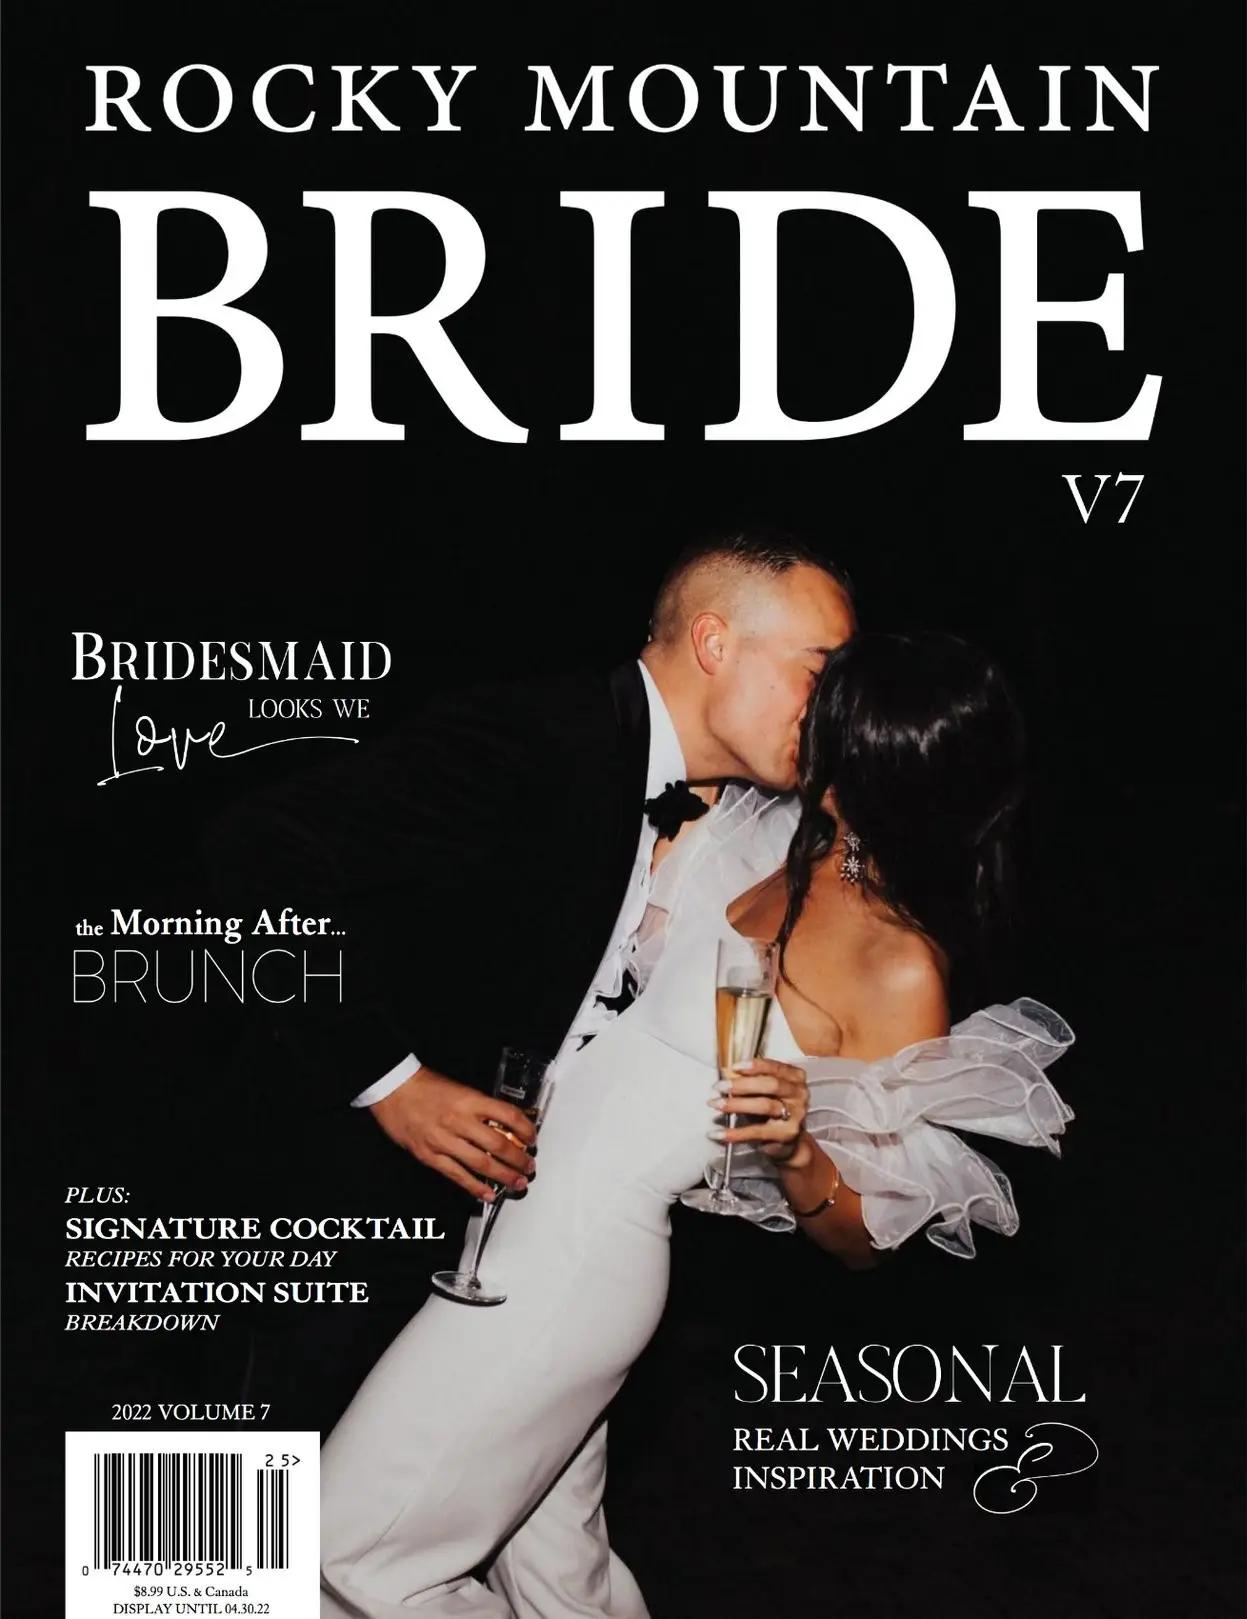 Our Bride and Bridal Party Styling Nationally Published in 17-page Spread Inside Rocky Mountain. Desktop Image